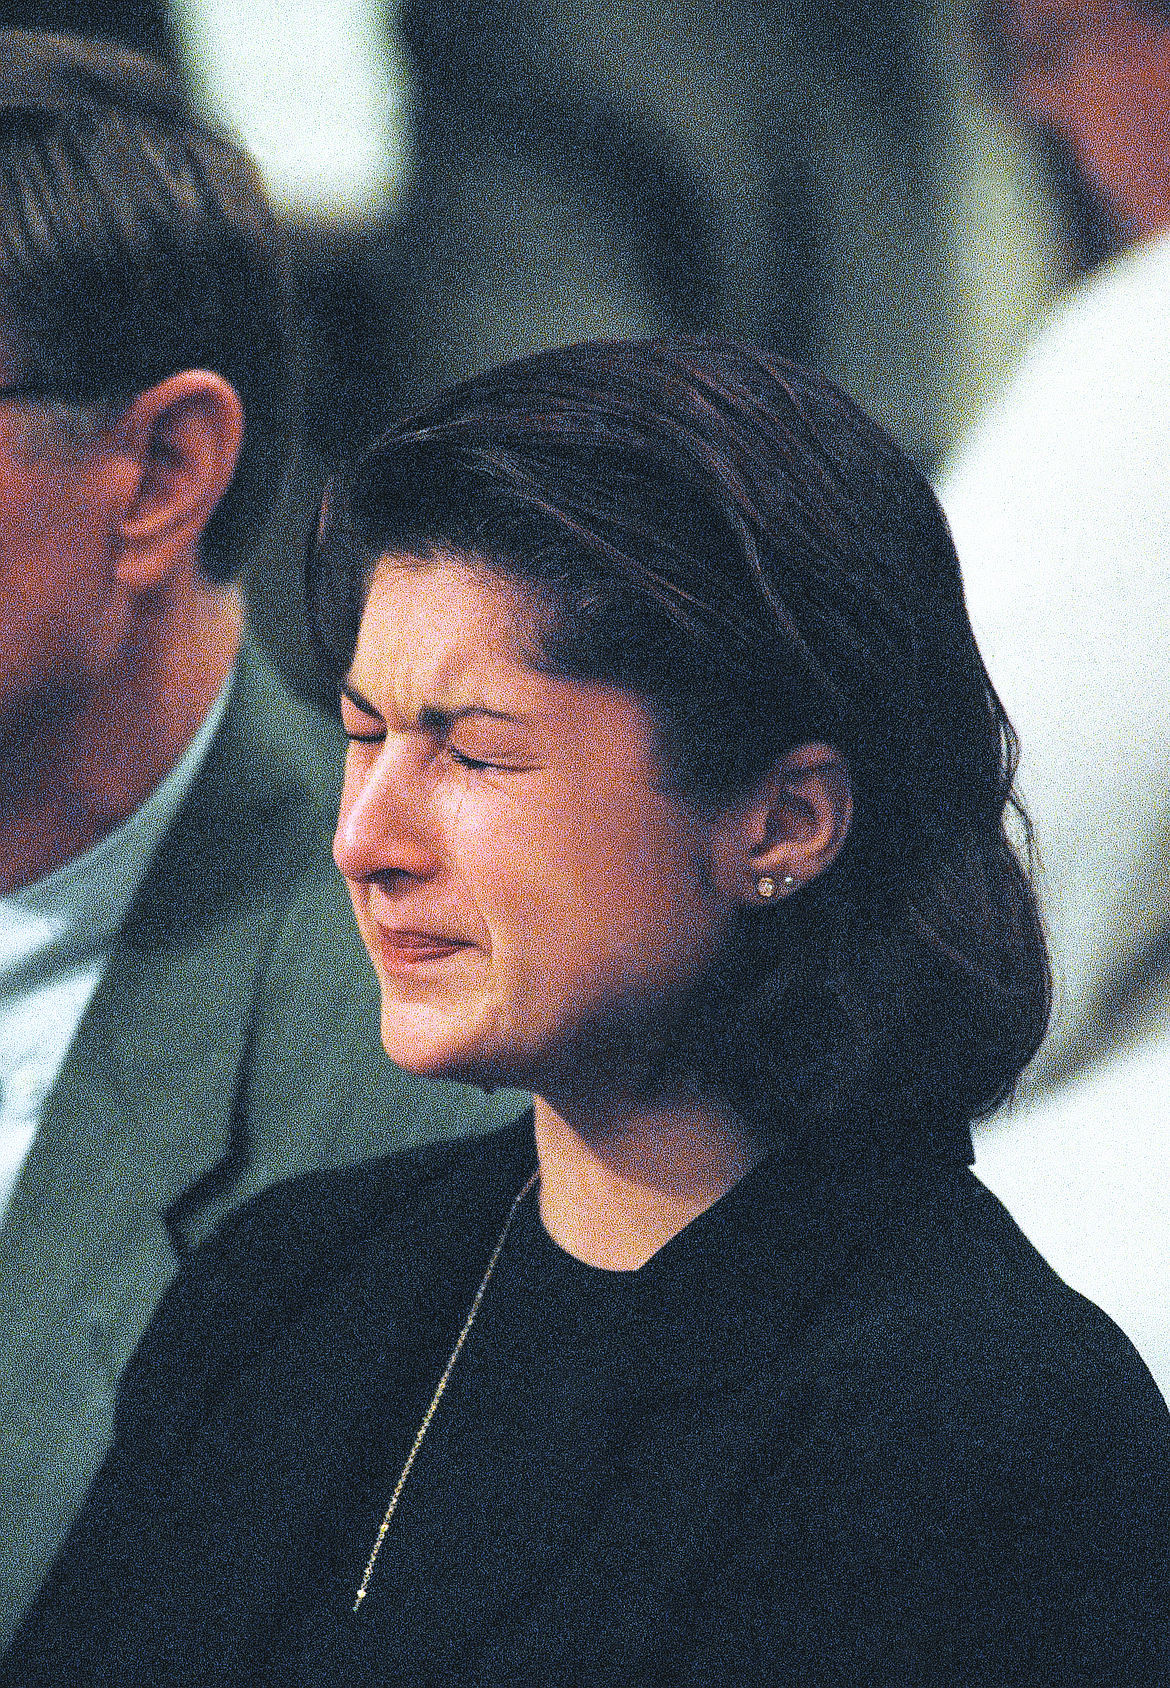 Tears stream down the face of Sara Weaver, daughter of white separatist Randy Weaver, as her father testifies on Capitol Hill in Washington, Sept. 6, 1995, before a Senate Judiciary subcommittee. Randy Weaver appealed to the subcommittee for “accountability for the killings of my wife and son” during a 1992 standoff with federal agents at his isolated cabin in Ruby Ridge, Idaho.